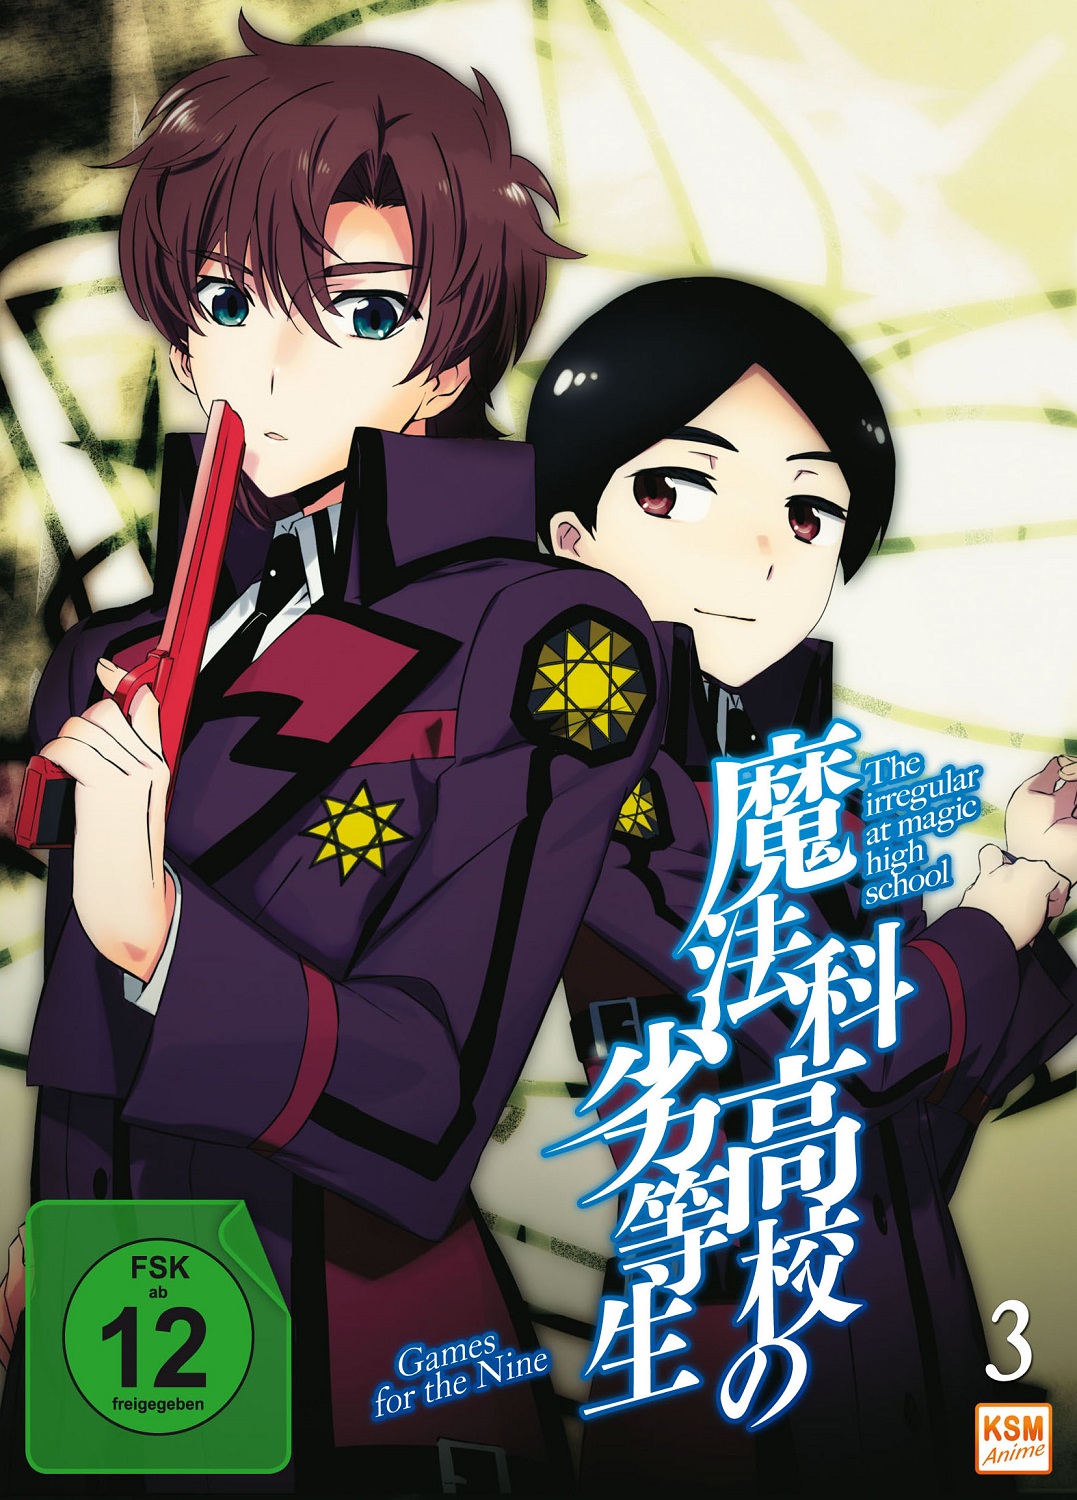 The irregular at Magic High School - Vol.3 - Games for the Nine: Ep. 13-18 [DVD]